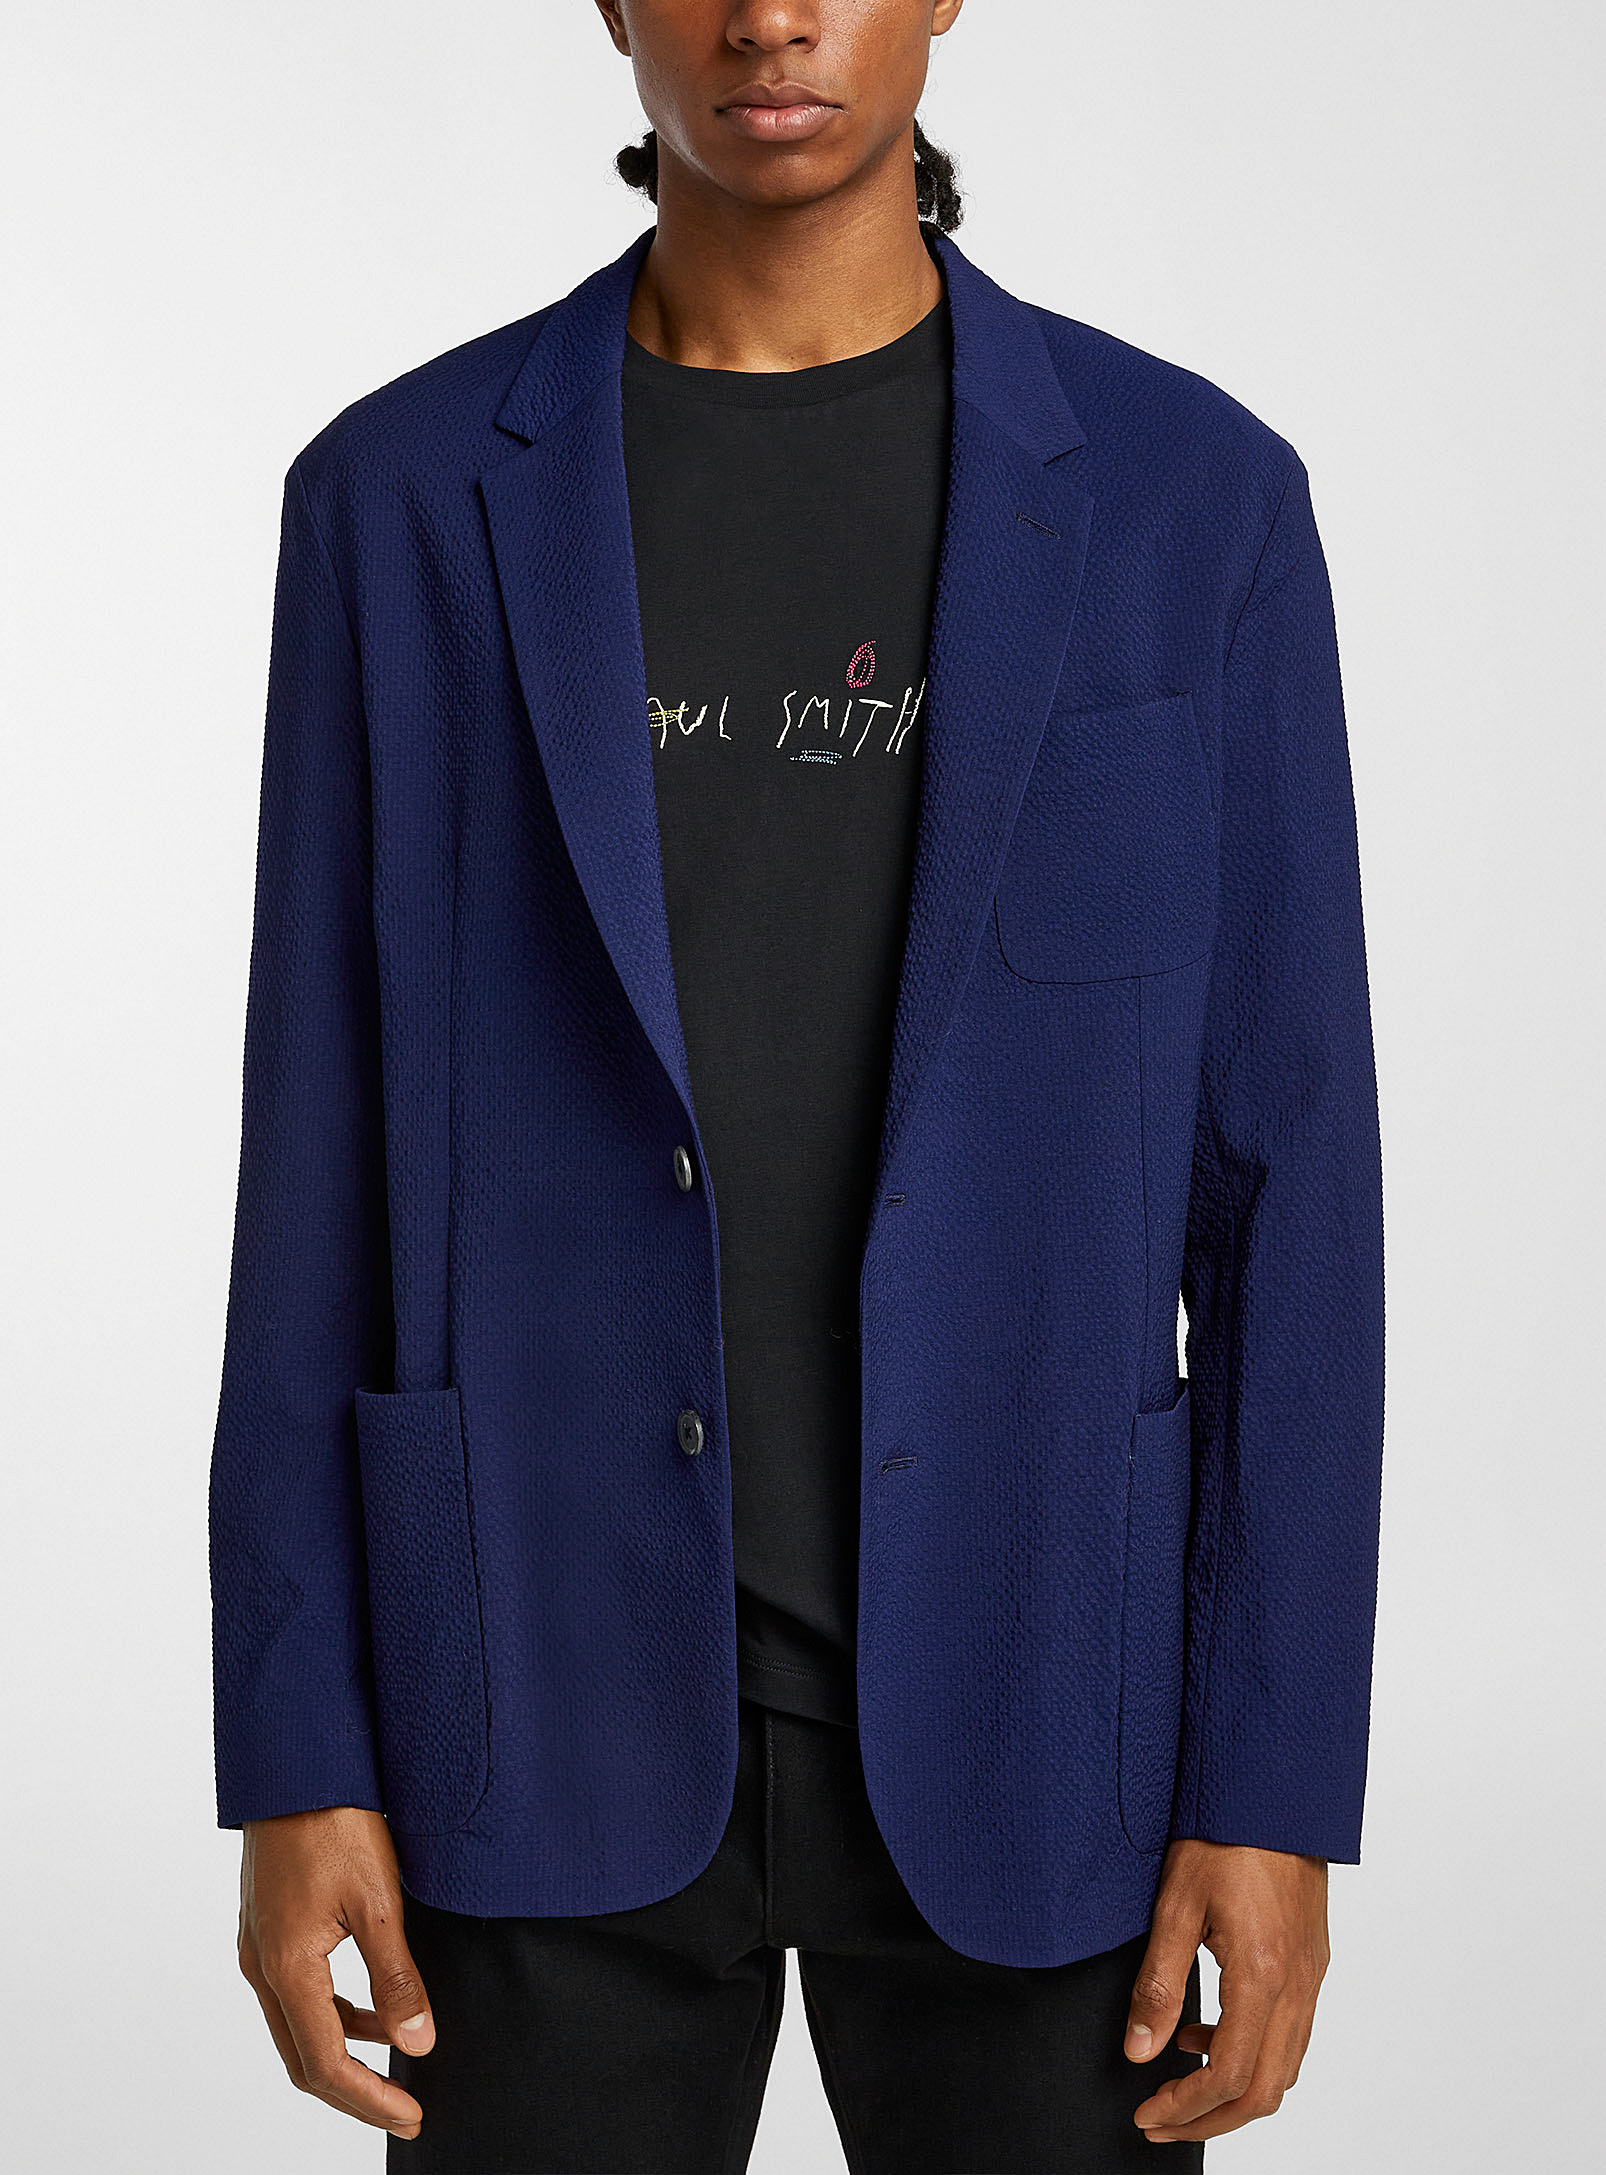 Paul Smith Waffled Texture Jacket In Teal